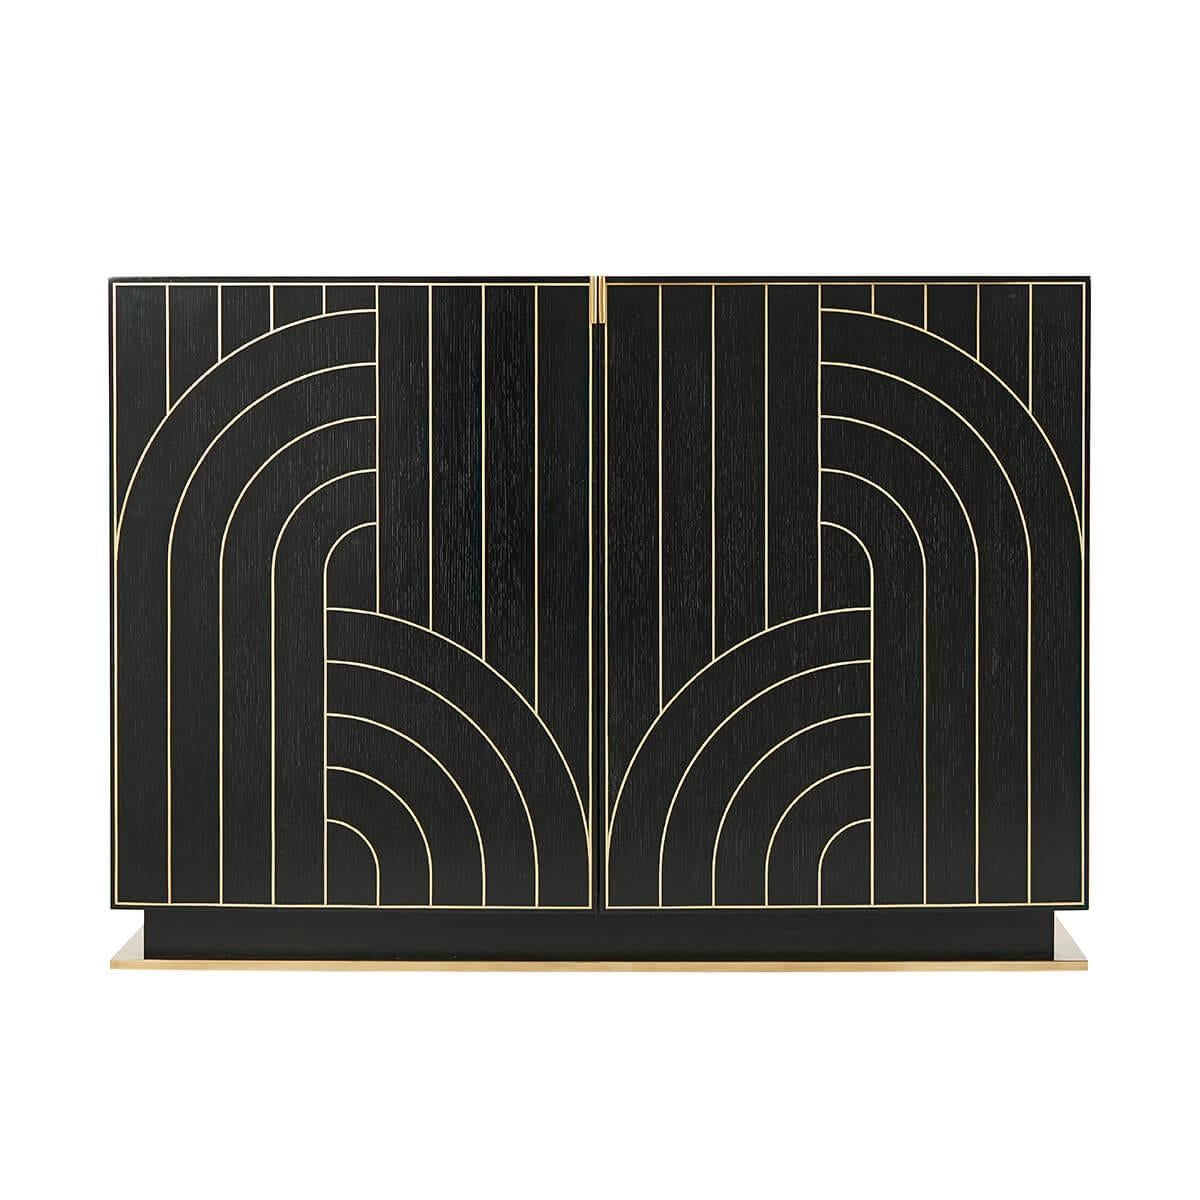 An Art Deco style brass inlaid ebonized oak buffet sideboard. Inspired by high-style art deco designs of the 1920s, the bowfront cabinet is raised on a stepped brass finish base.

Dimensions: 48